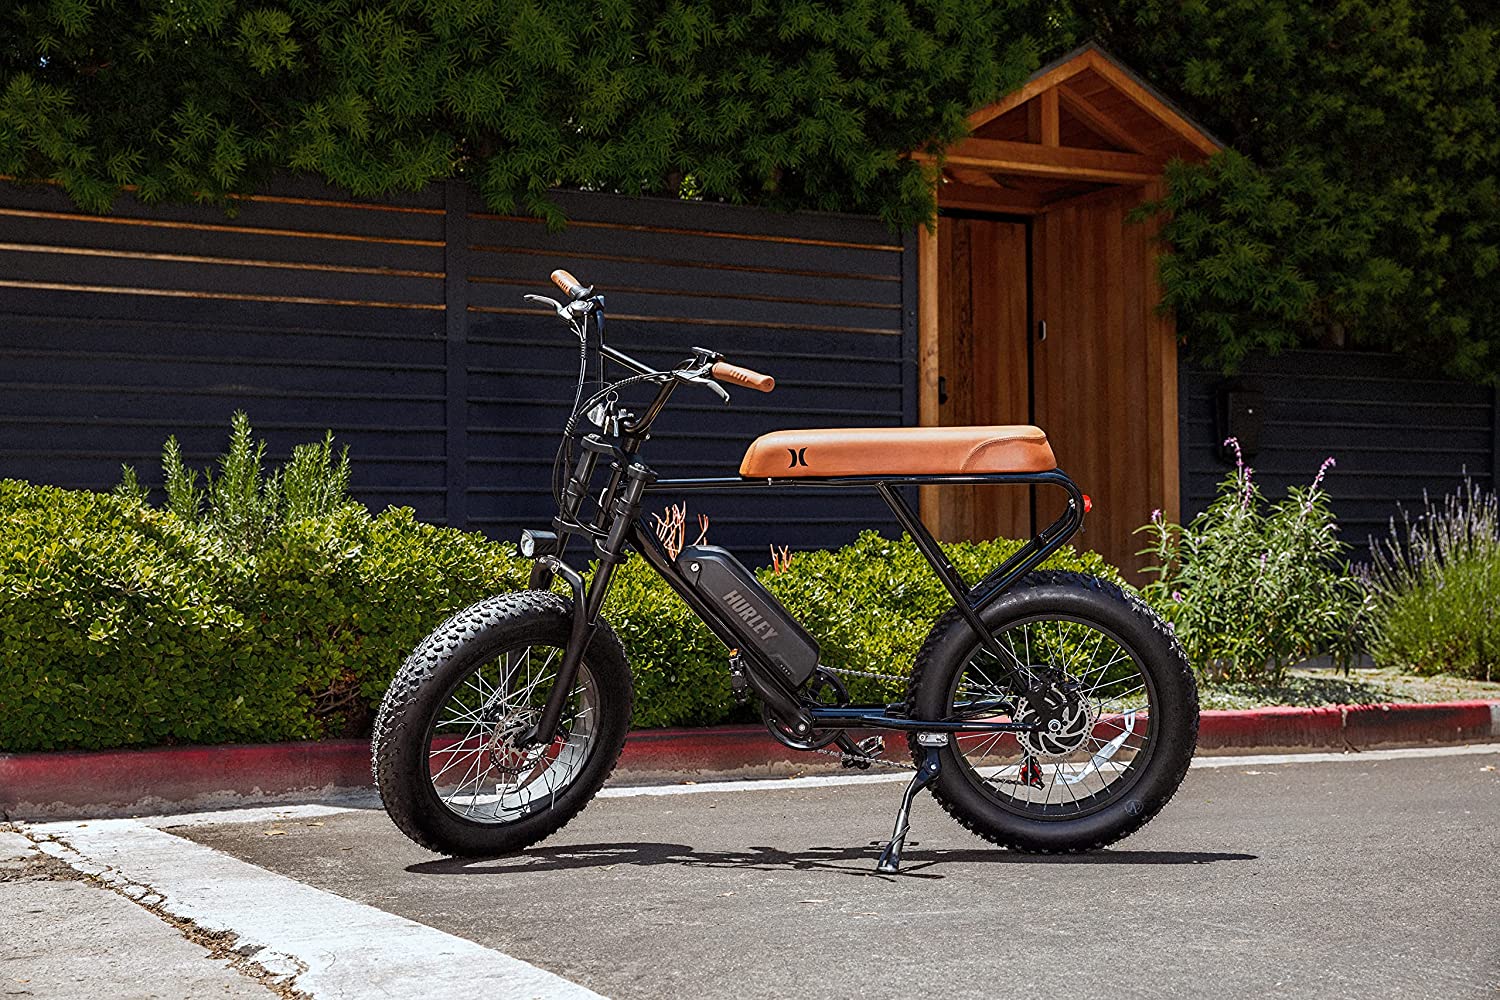 20 inch fat tire electric bike with 48V 500W motor